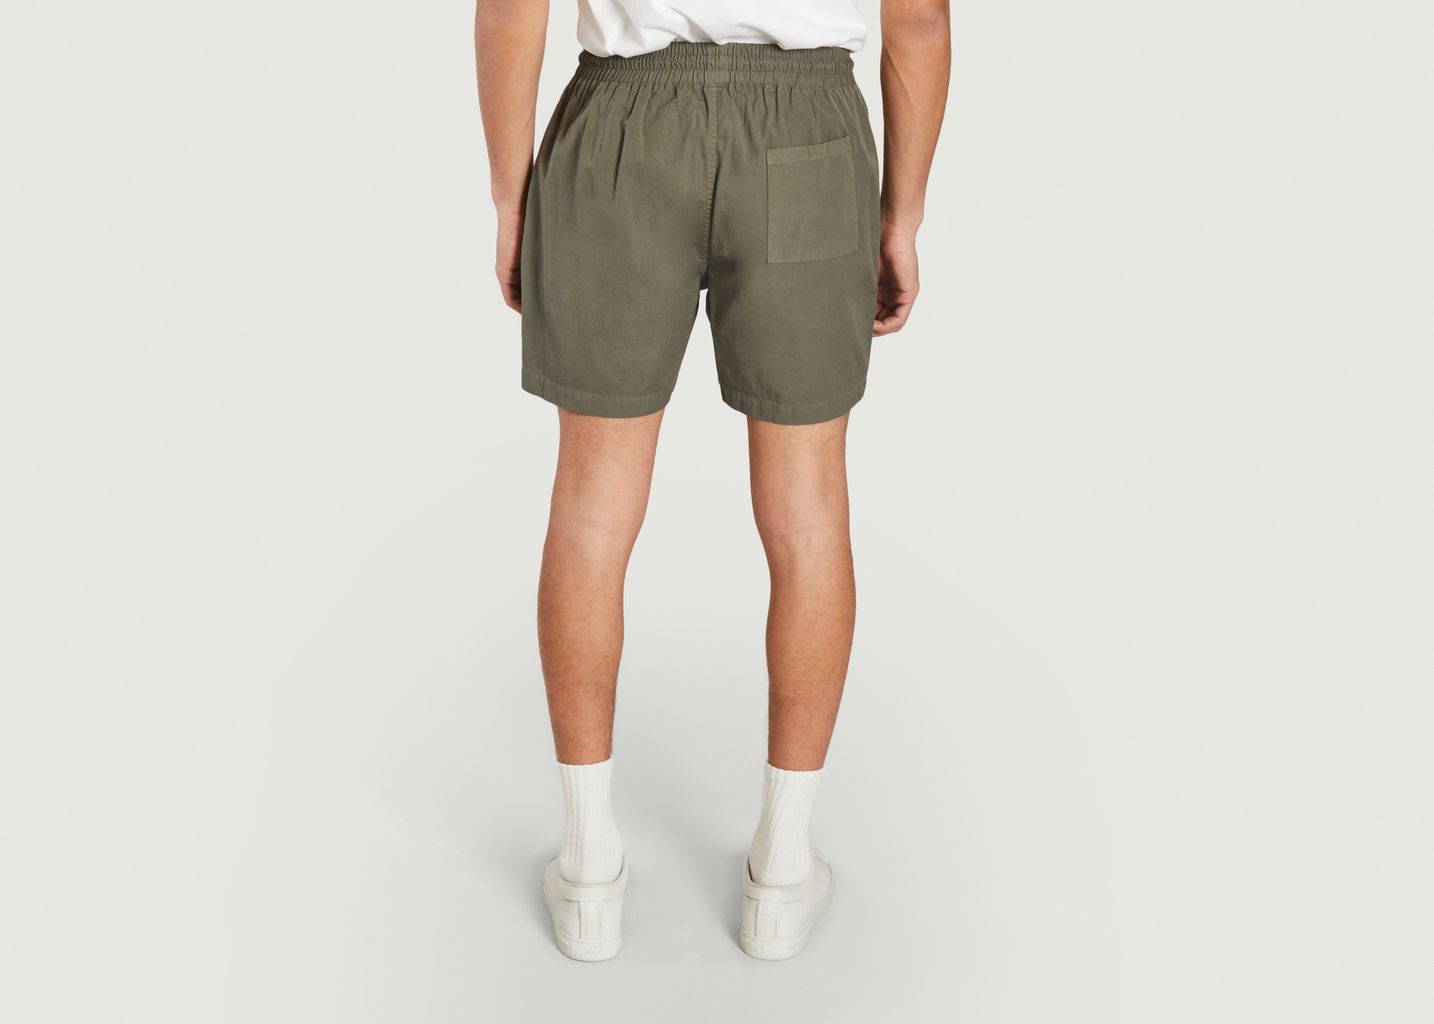 Twill Short - Colorful Standard